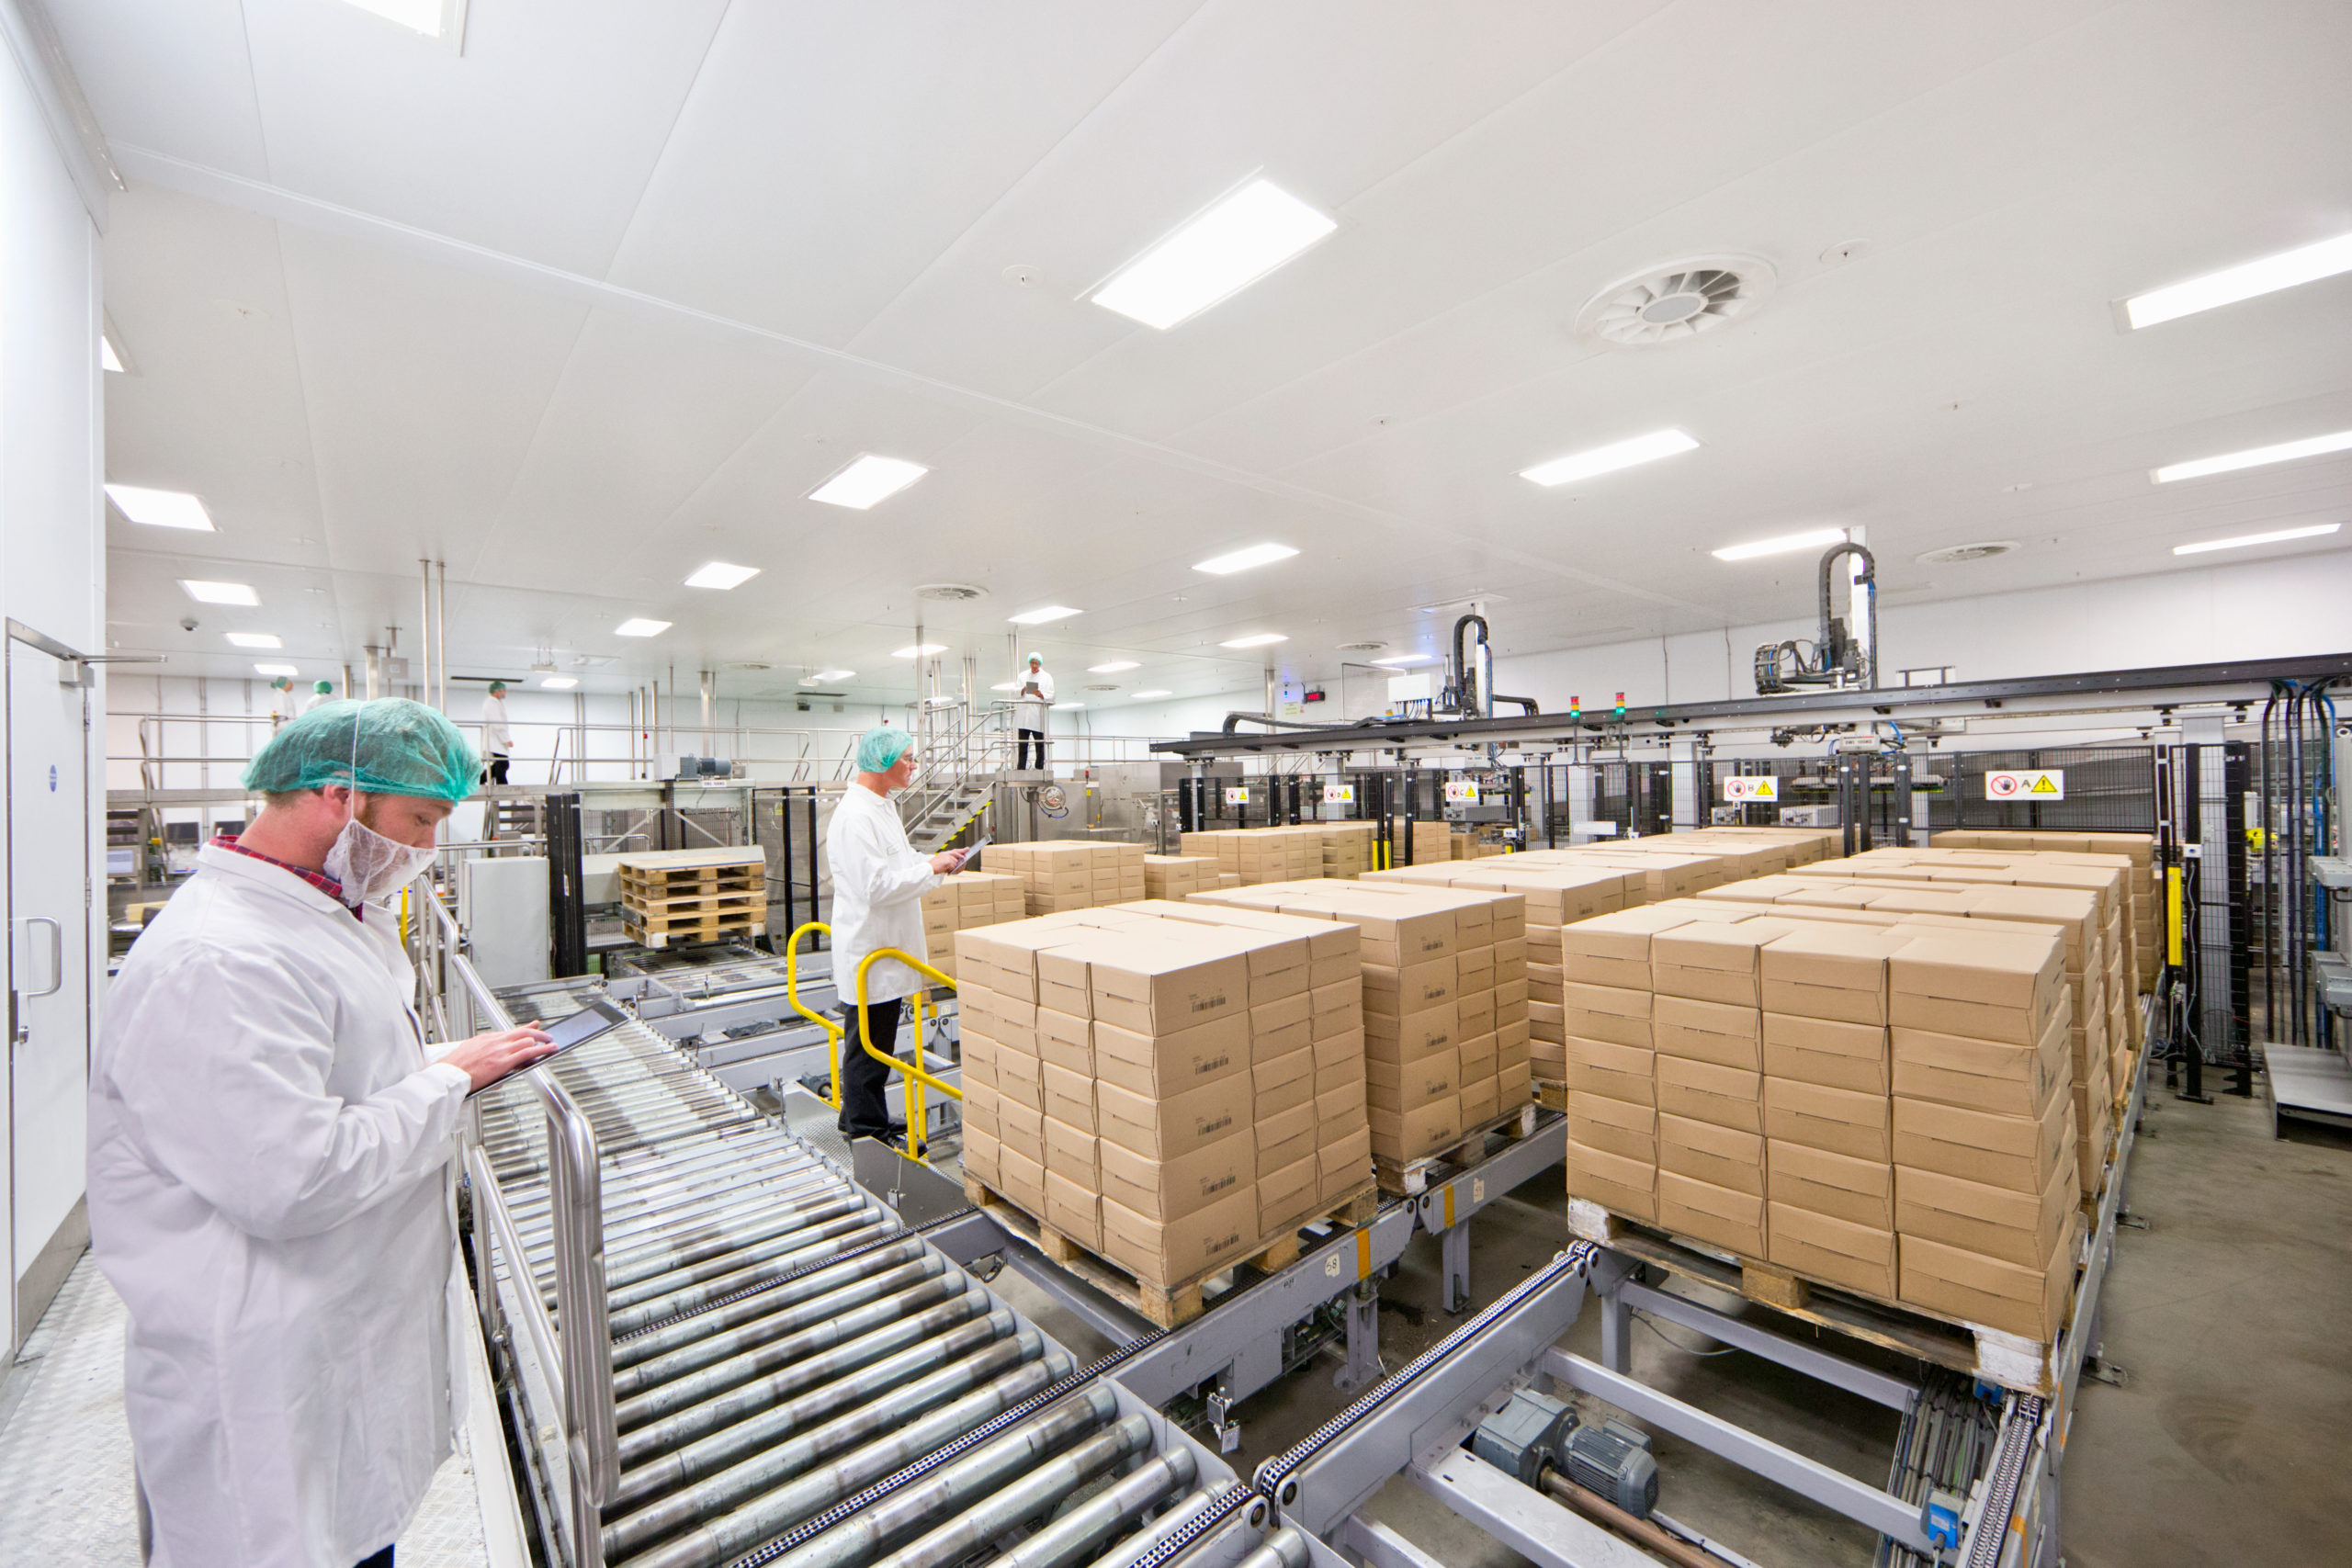 Rows of closed boxes sit on conveyor belts as worker types something on a tablet.